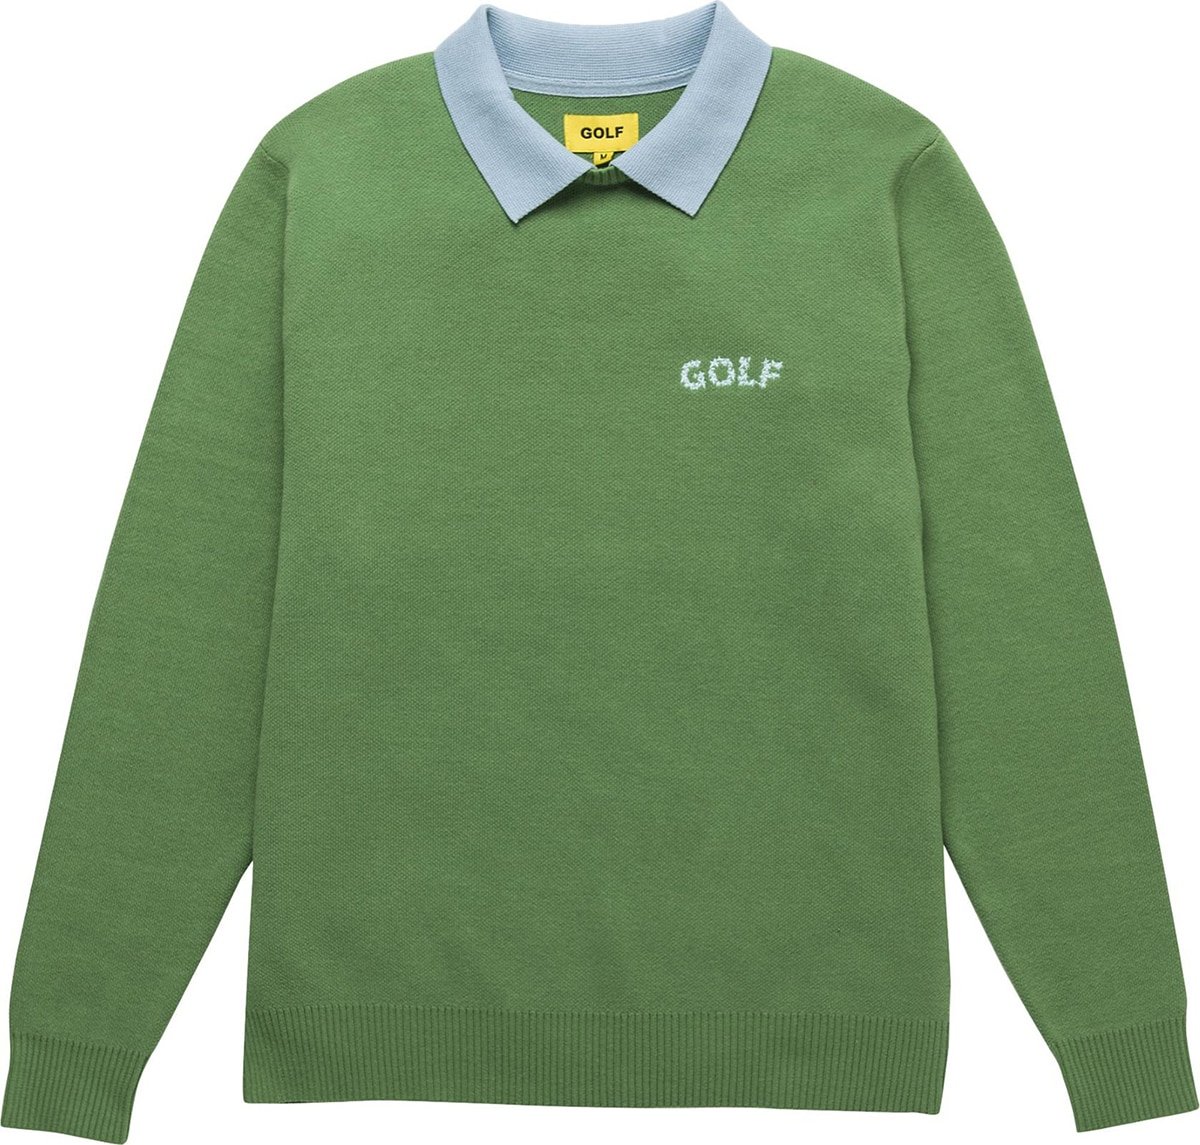 From the Fall/Winter 2022 collection, this collared sweater boasts Golf Wang's star-patterned galaxy logo